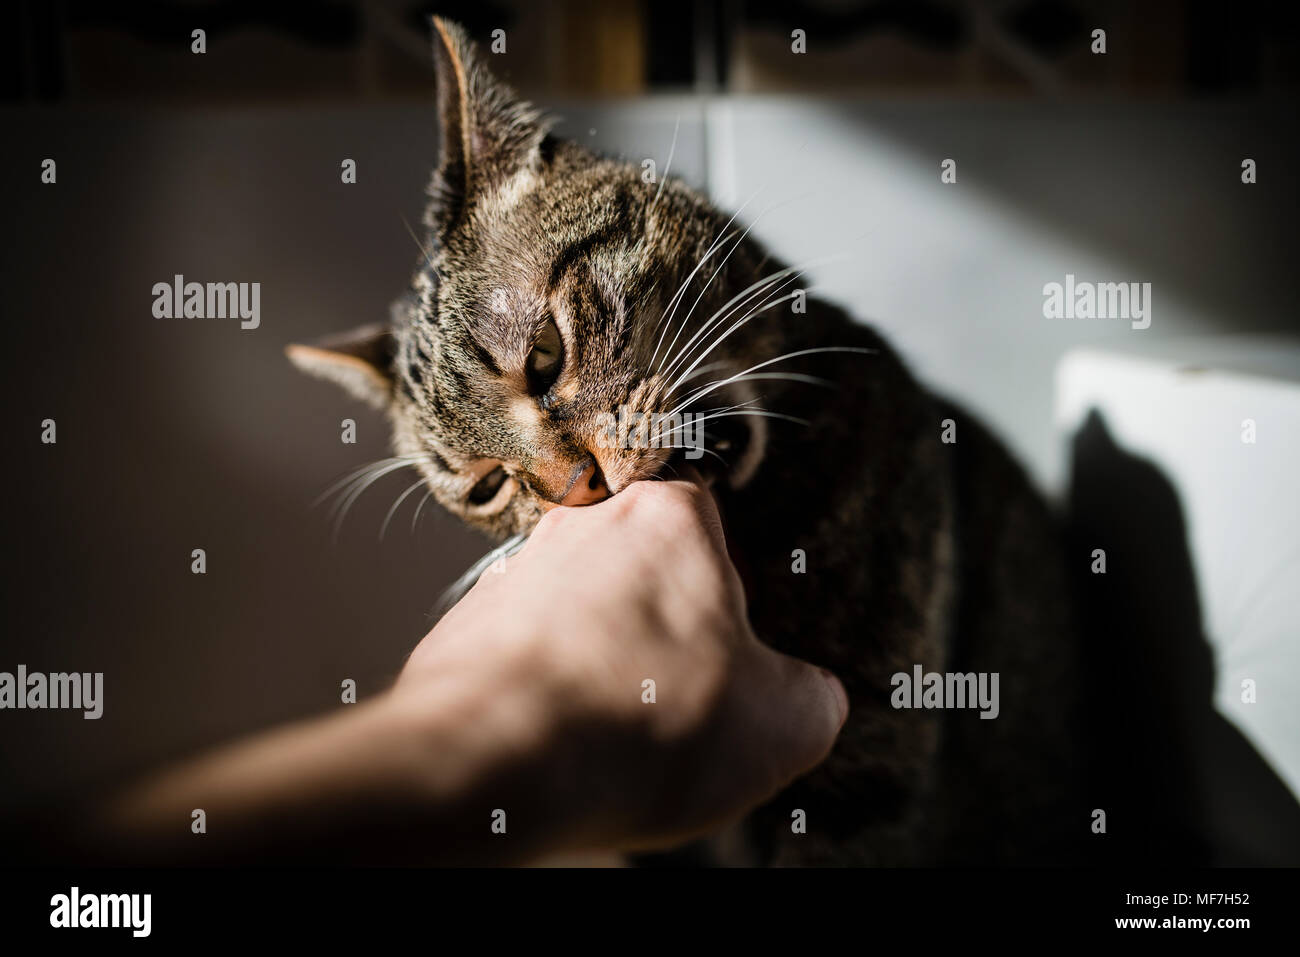 Tabby cat biting hand of owner Stock Photo